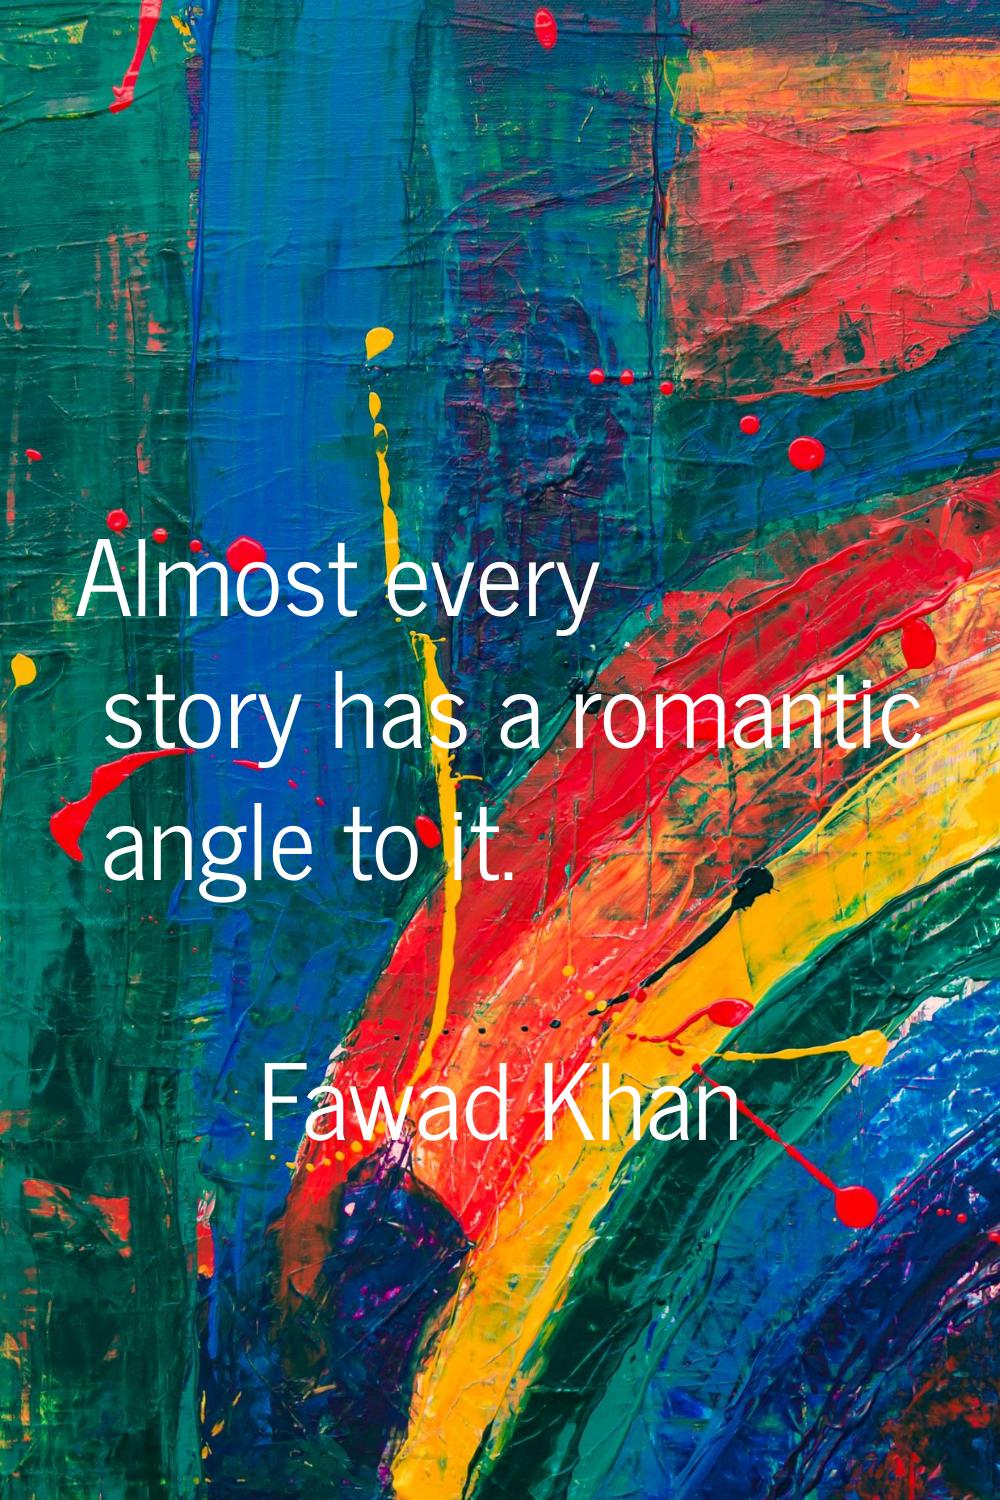 Almost every story has a romantic angle to it.